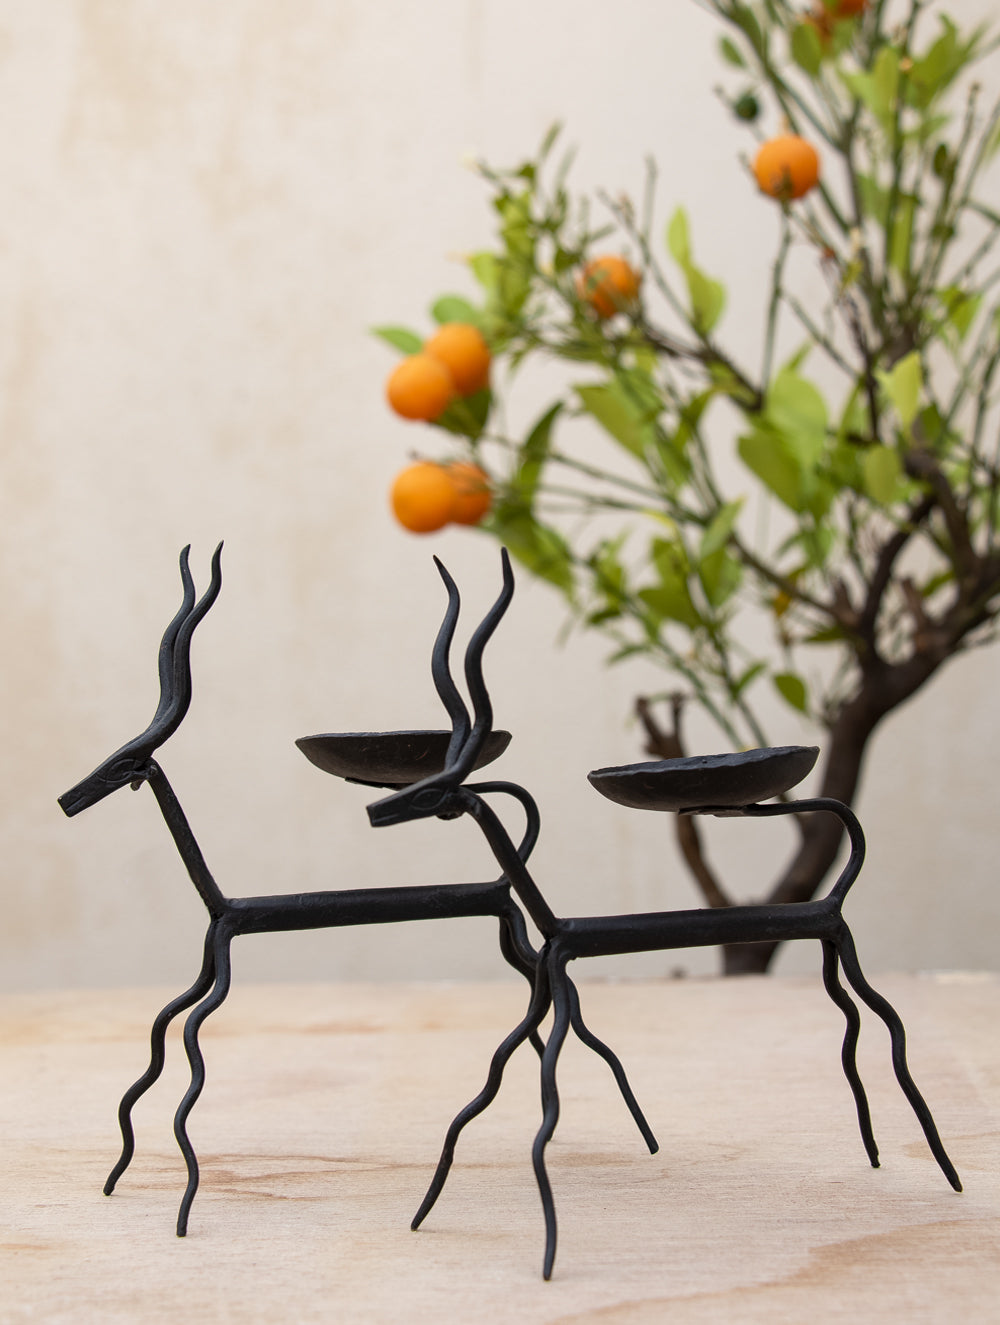 Load image into Gallery viewer, Bastar Tribal Art - Candle Holders - Deer (Set of 2) - The India Craft House 